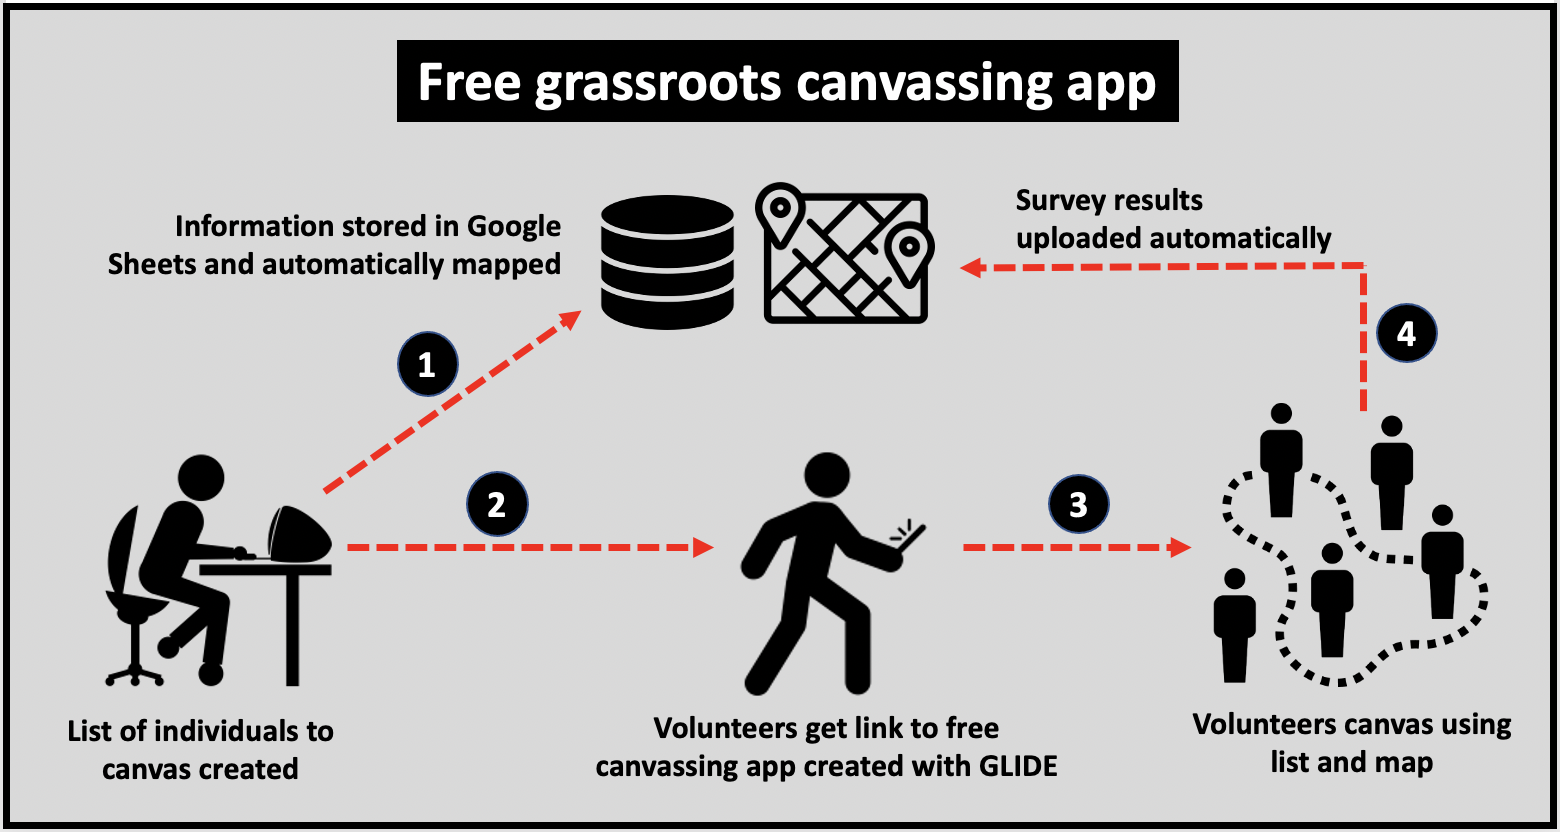 Free grassroots canvassing app built with Google Sheets and Glide Apps. 